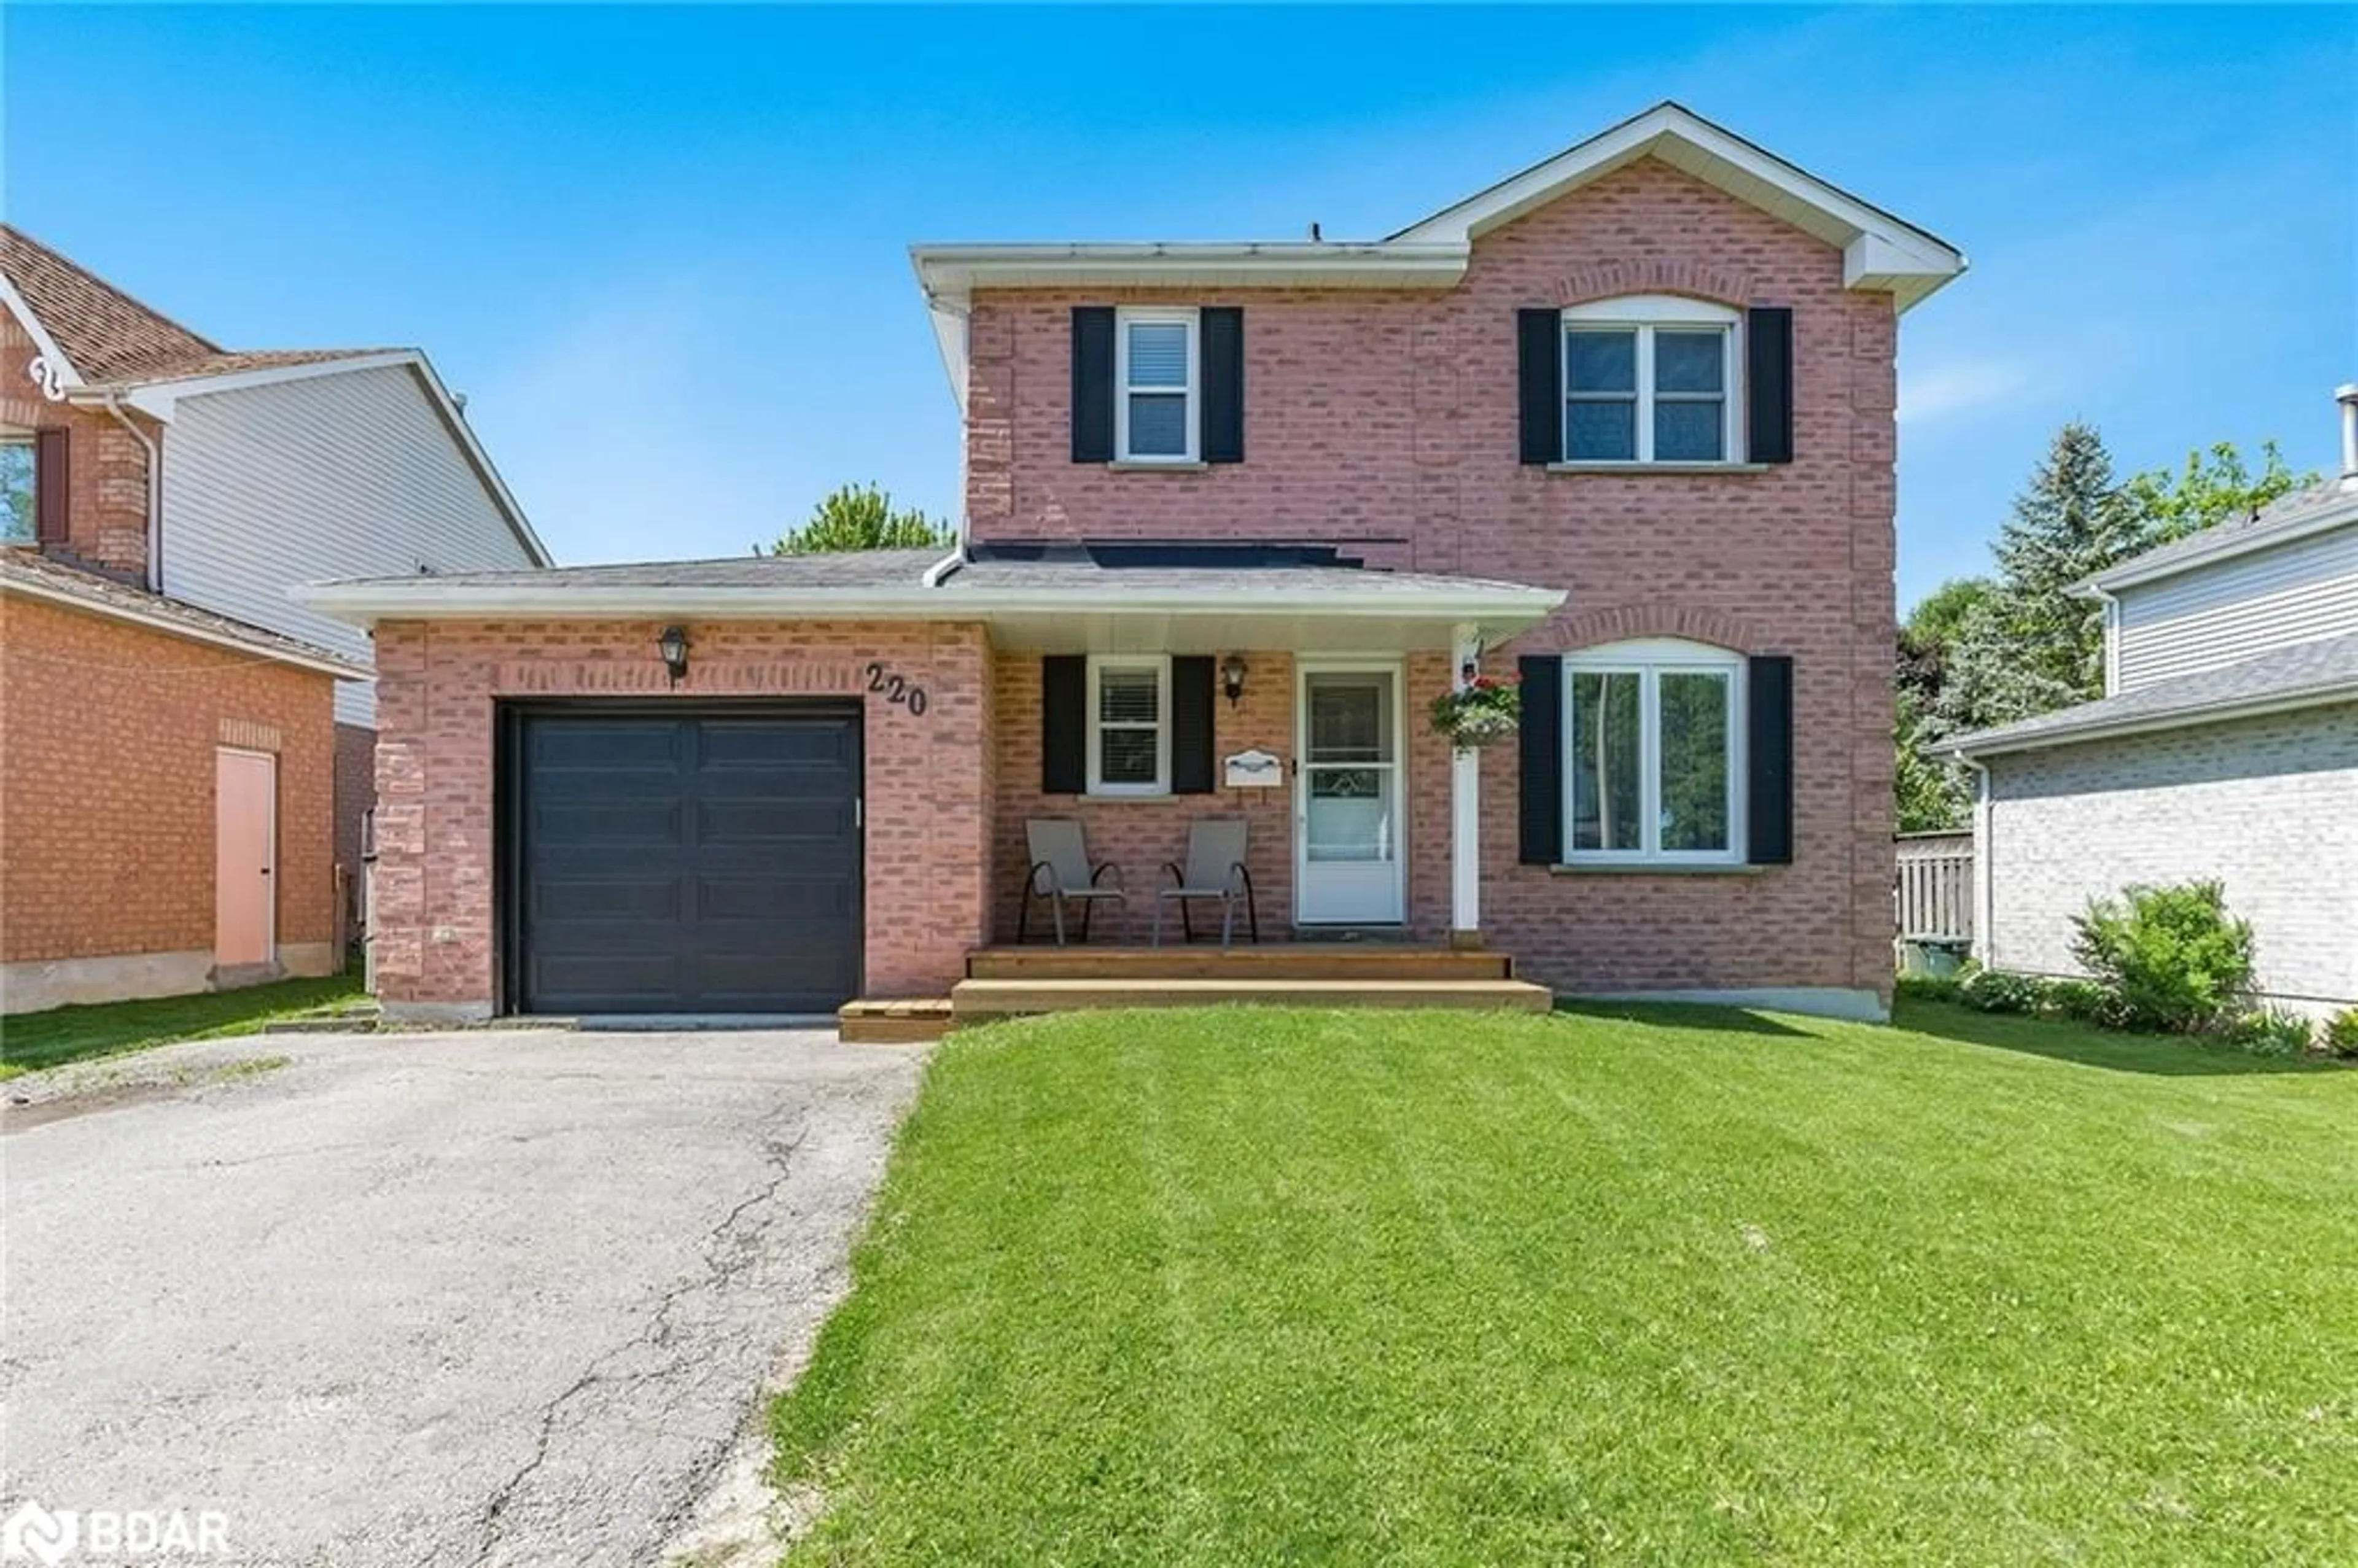 Home with brick exterior material for 220 Mary Anne Dr, Barrie Ontario L4N 7R2